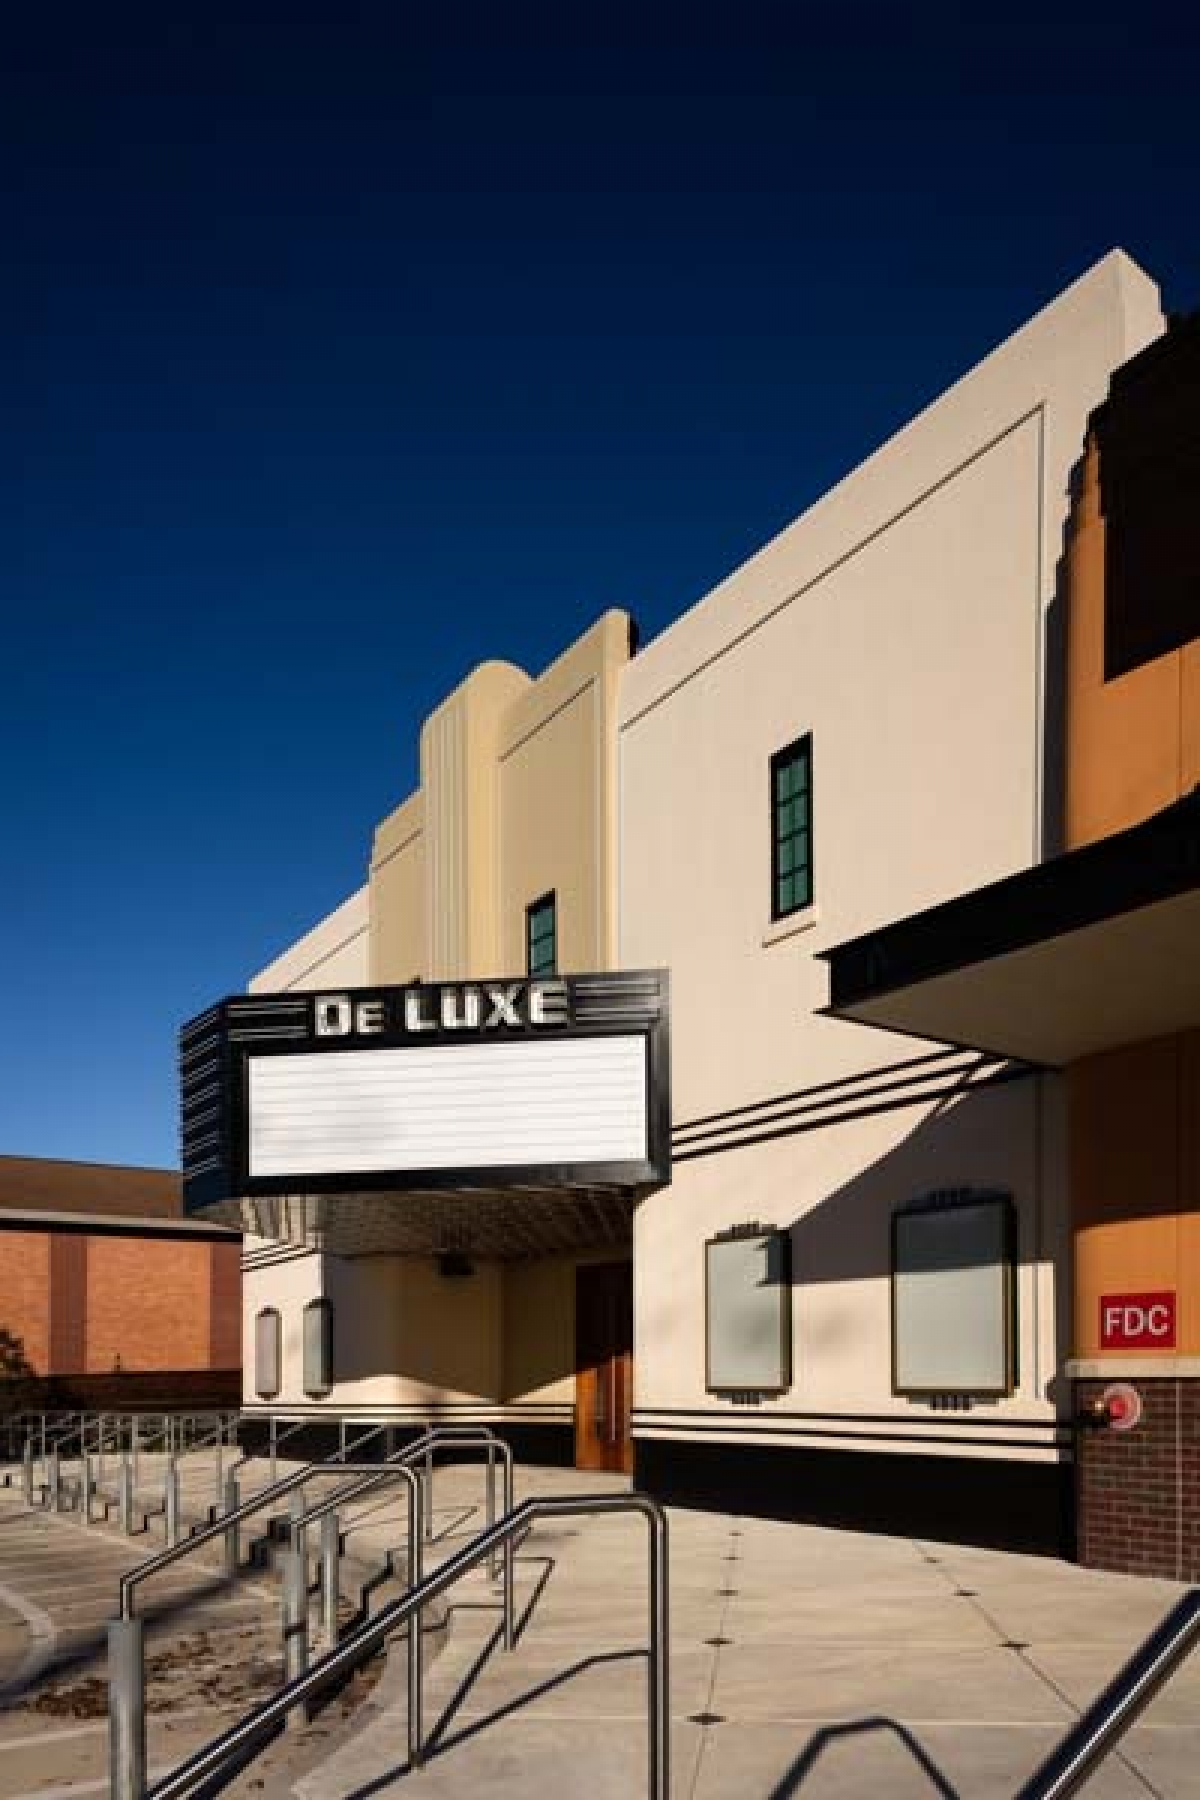 Deluxe Theater Addition and Renovation